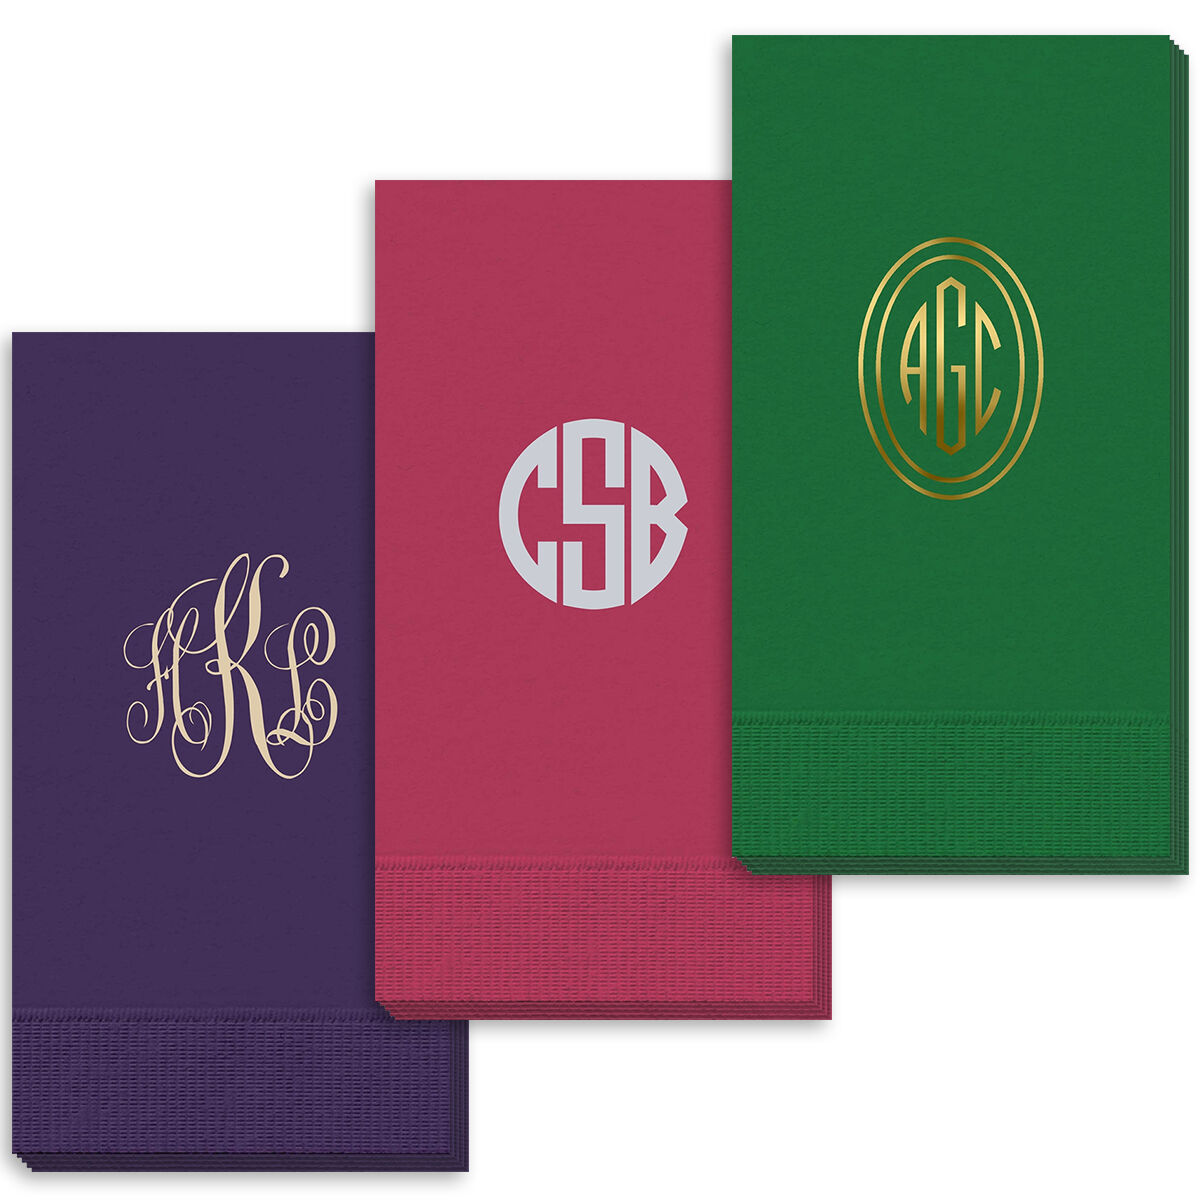 100 Personalized Guest Towels Bathroom Restroom Hand Towels Dinner Napkins Wedding Paper Hostess Gift Monogram Lots of Colors to choose from